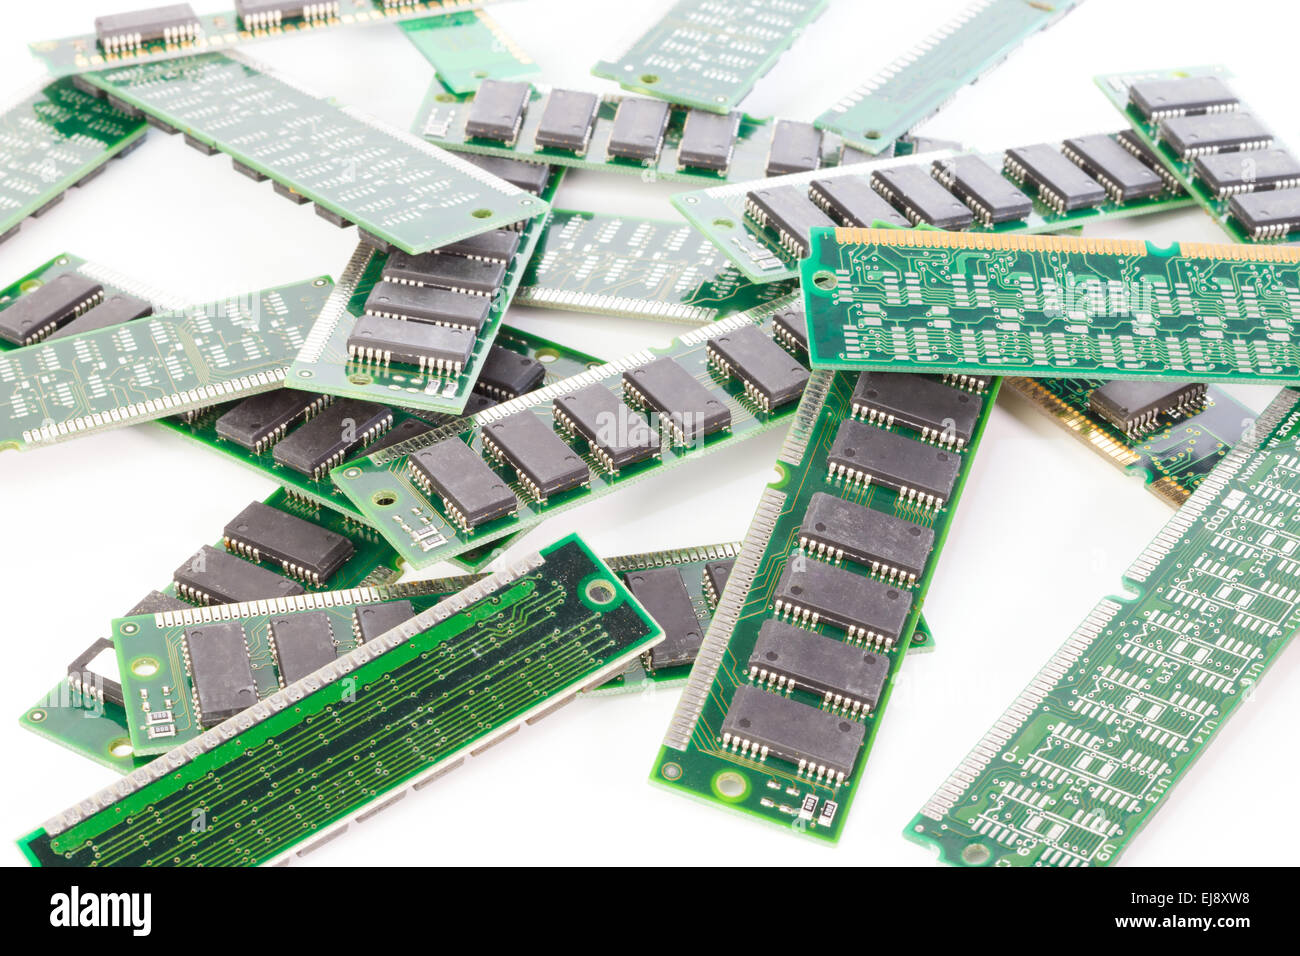 Bunch of computer memory modules against white background Stock Photo